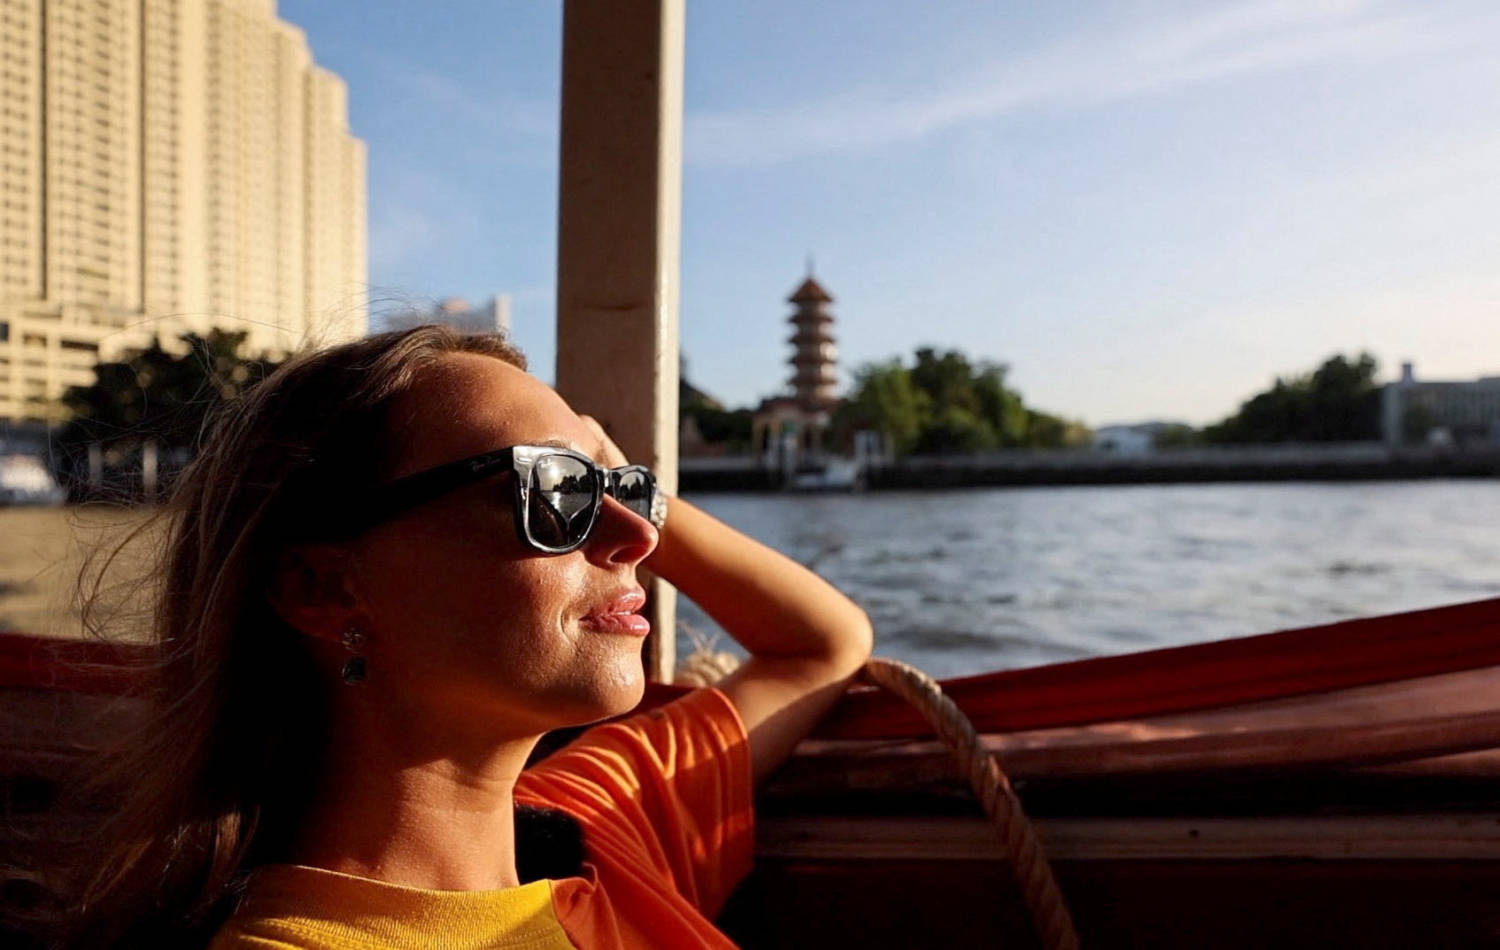 Lillian Smith, 30, From Mississippi, U.s. Goes On A City Tour At Wat Arun Temple In Bangkok